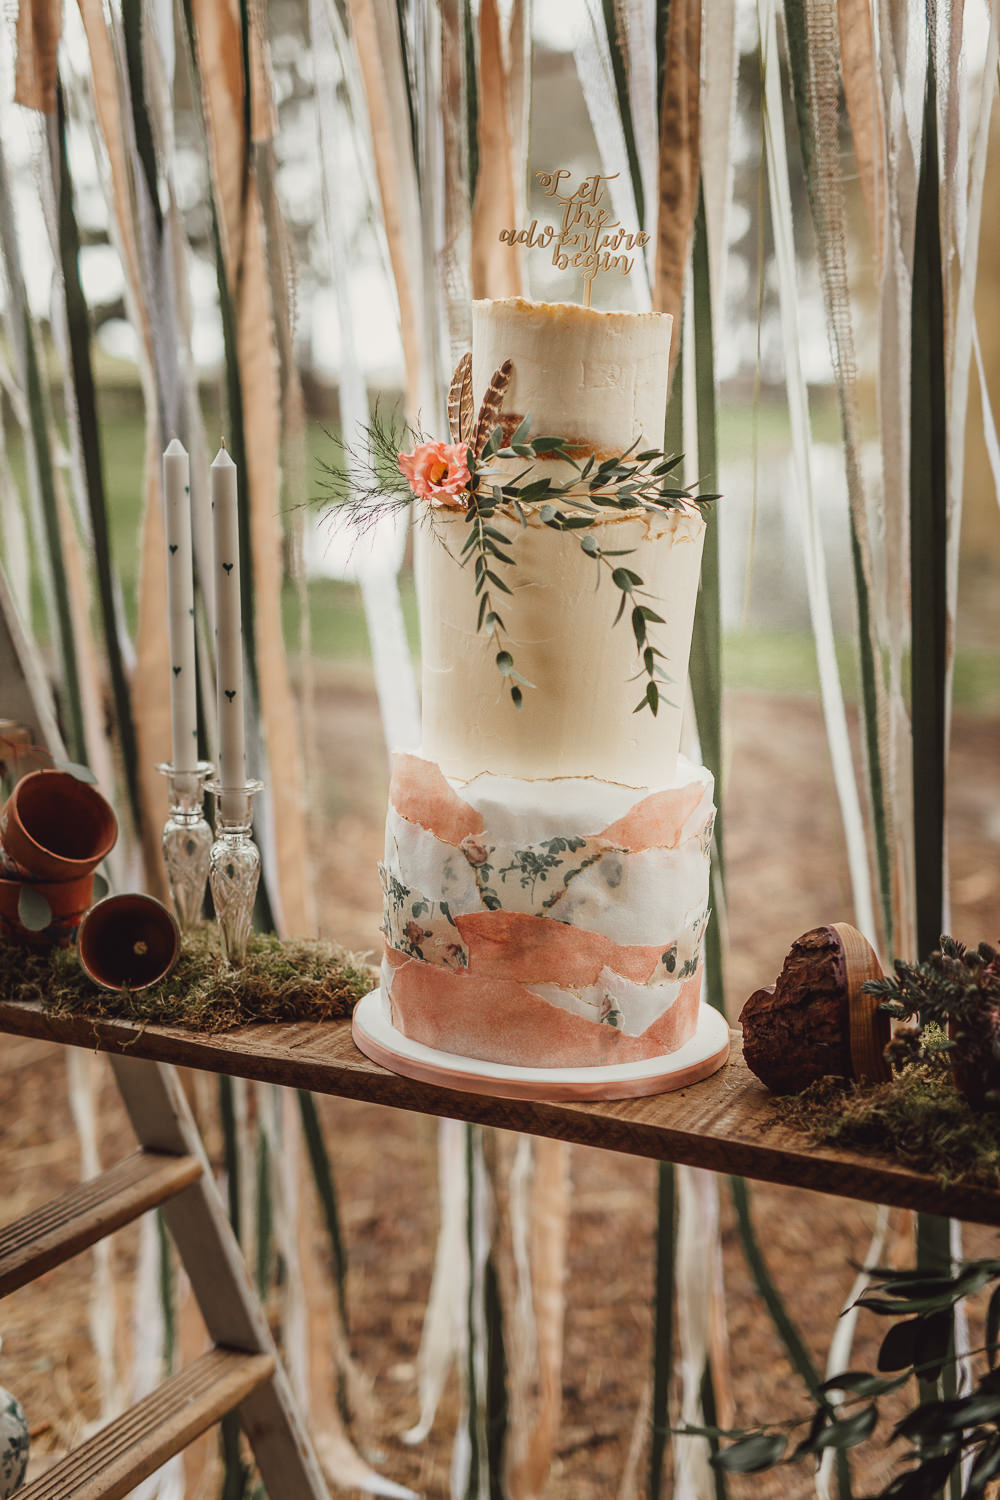 The cake was a semi naked one with greenery, feathers, blooms and a calligraphy topper